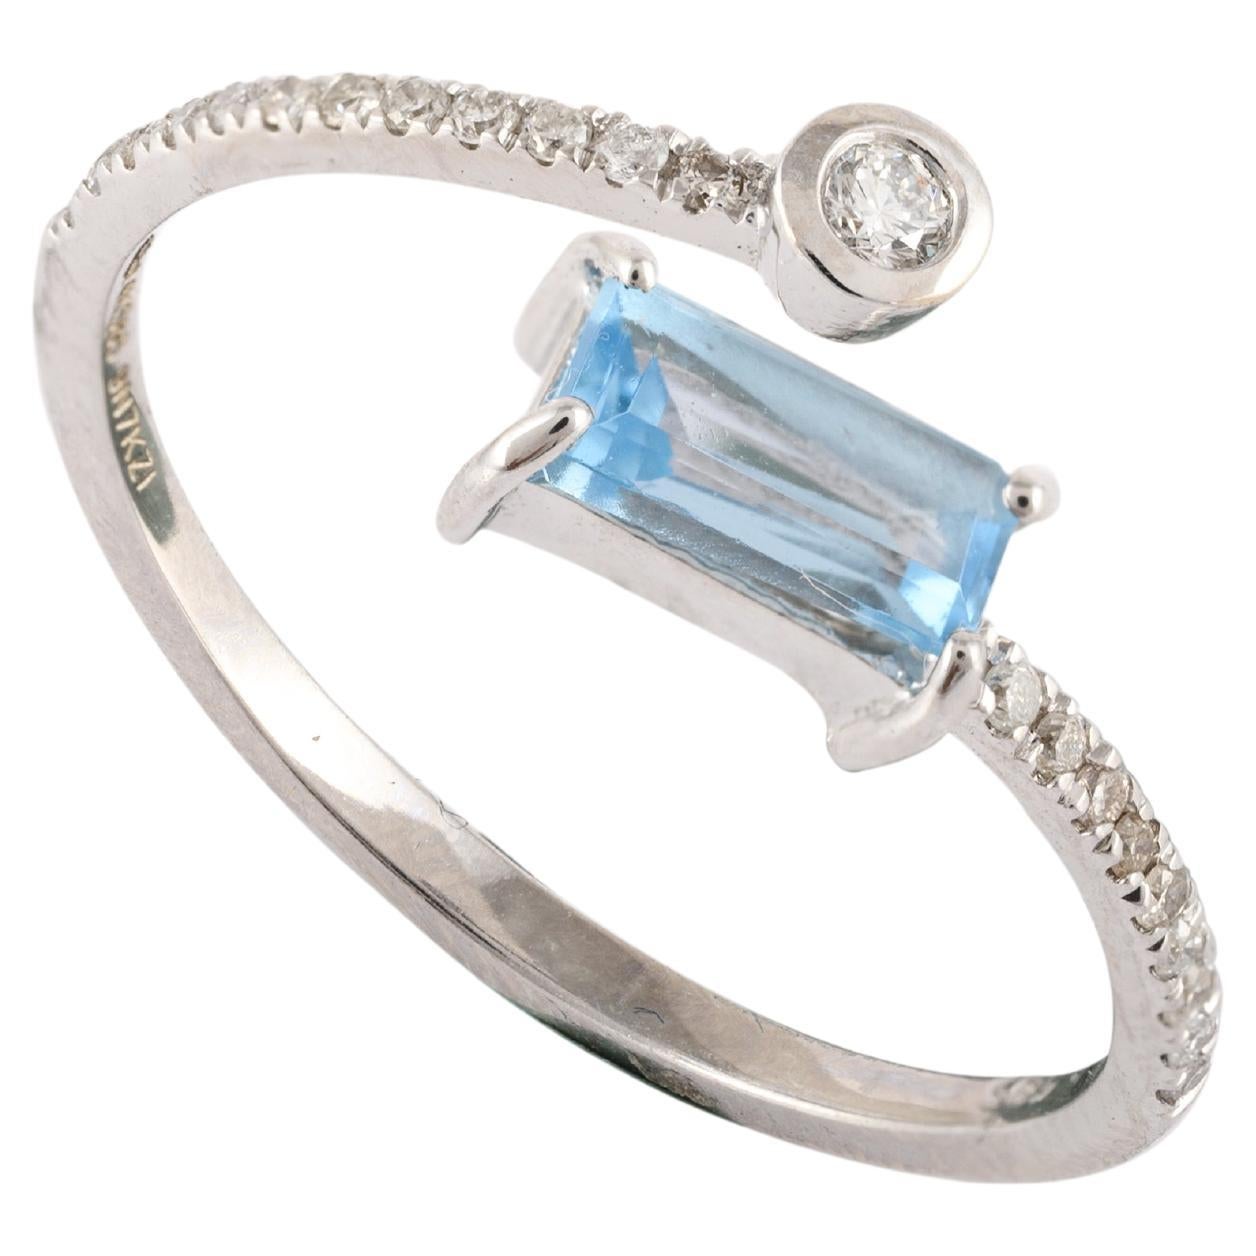 For Sale:  Blue Topaz and Diamond Wrap Ring For Her in 14kt Solid White Gold